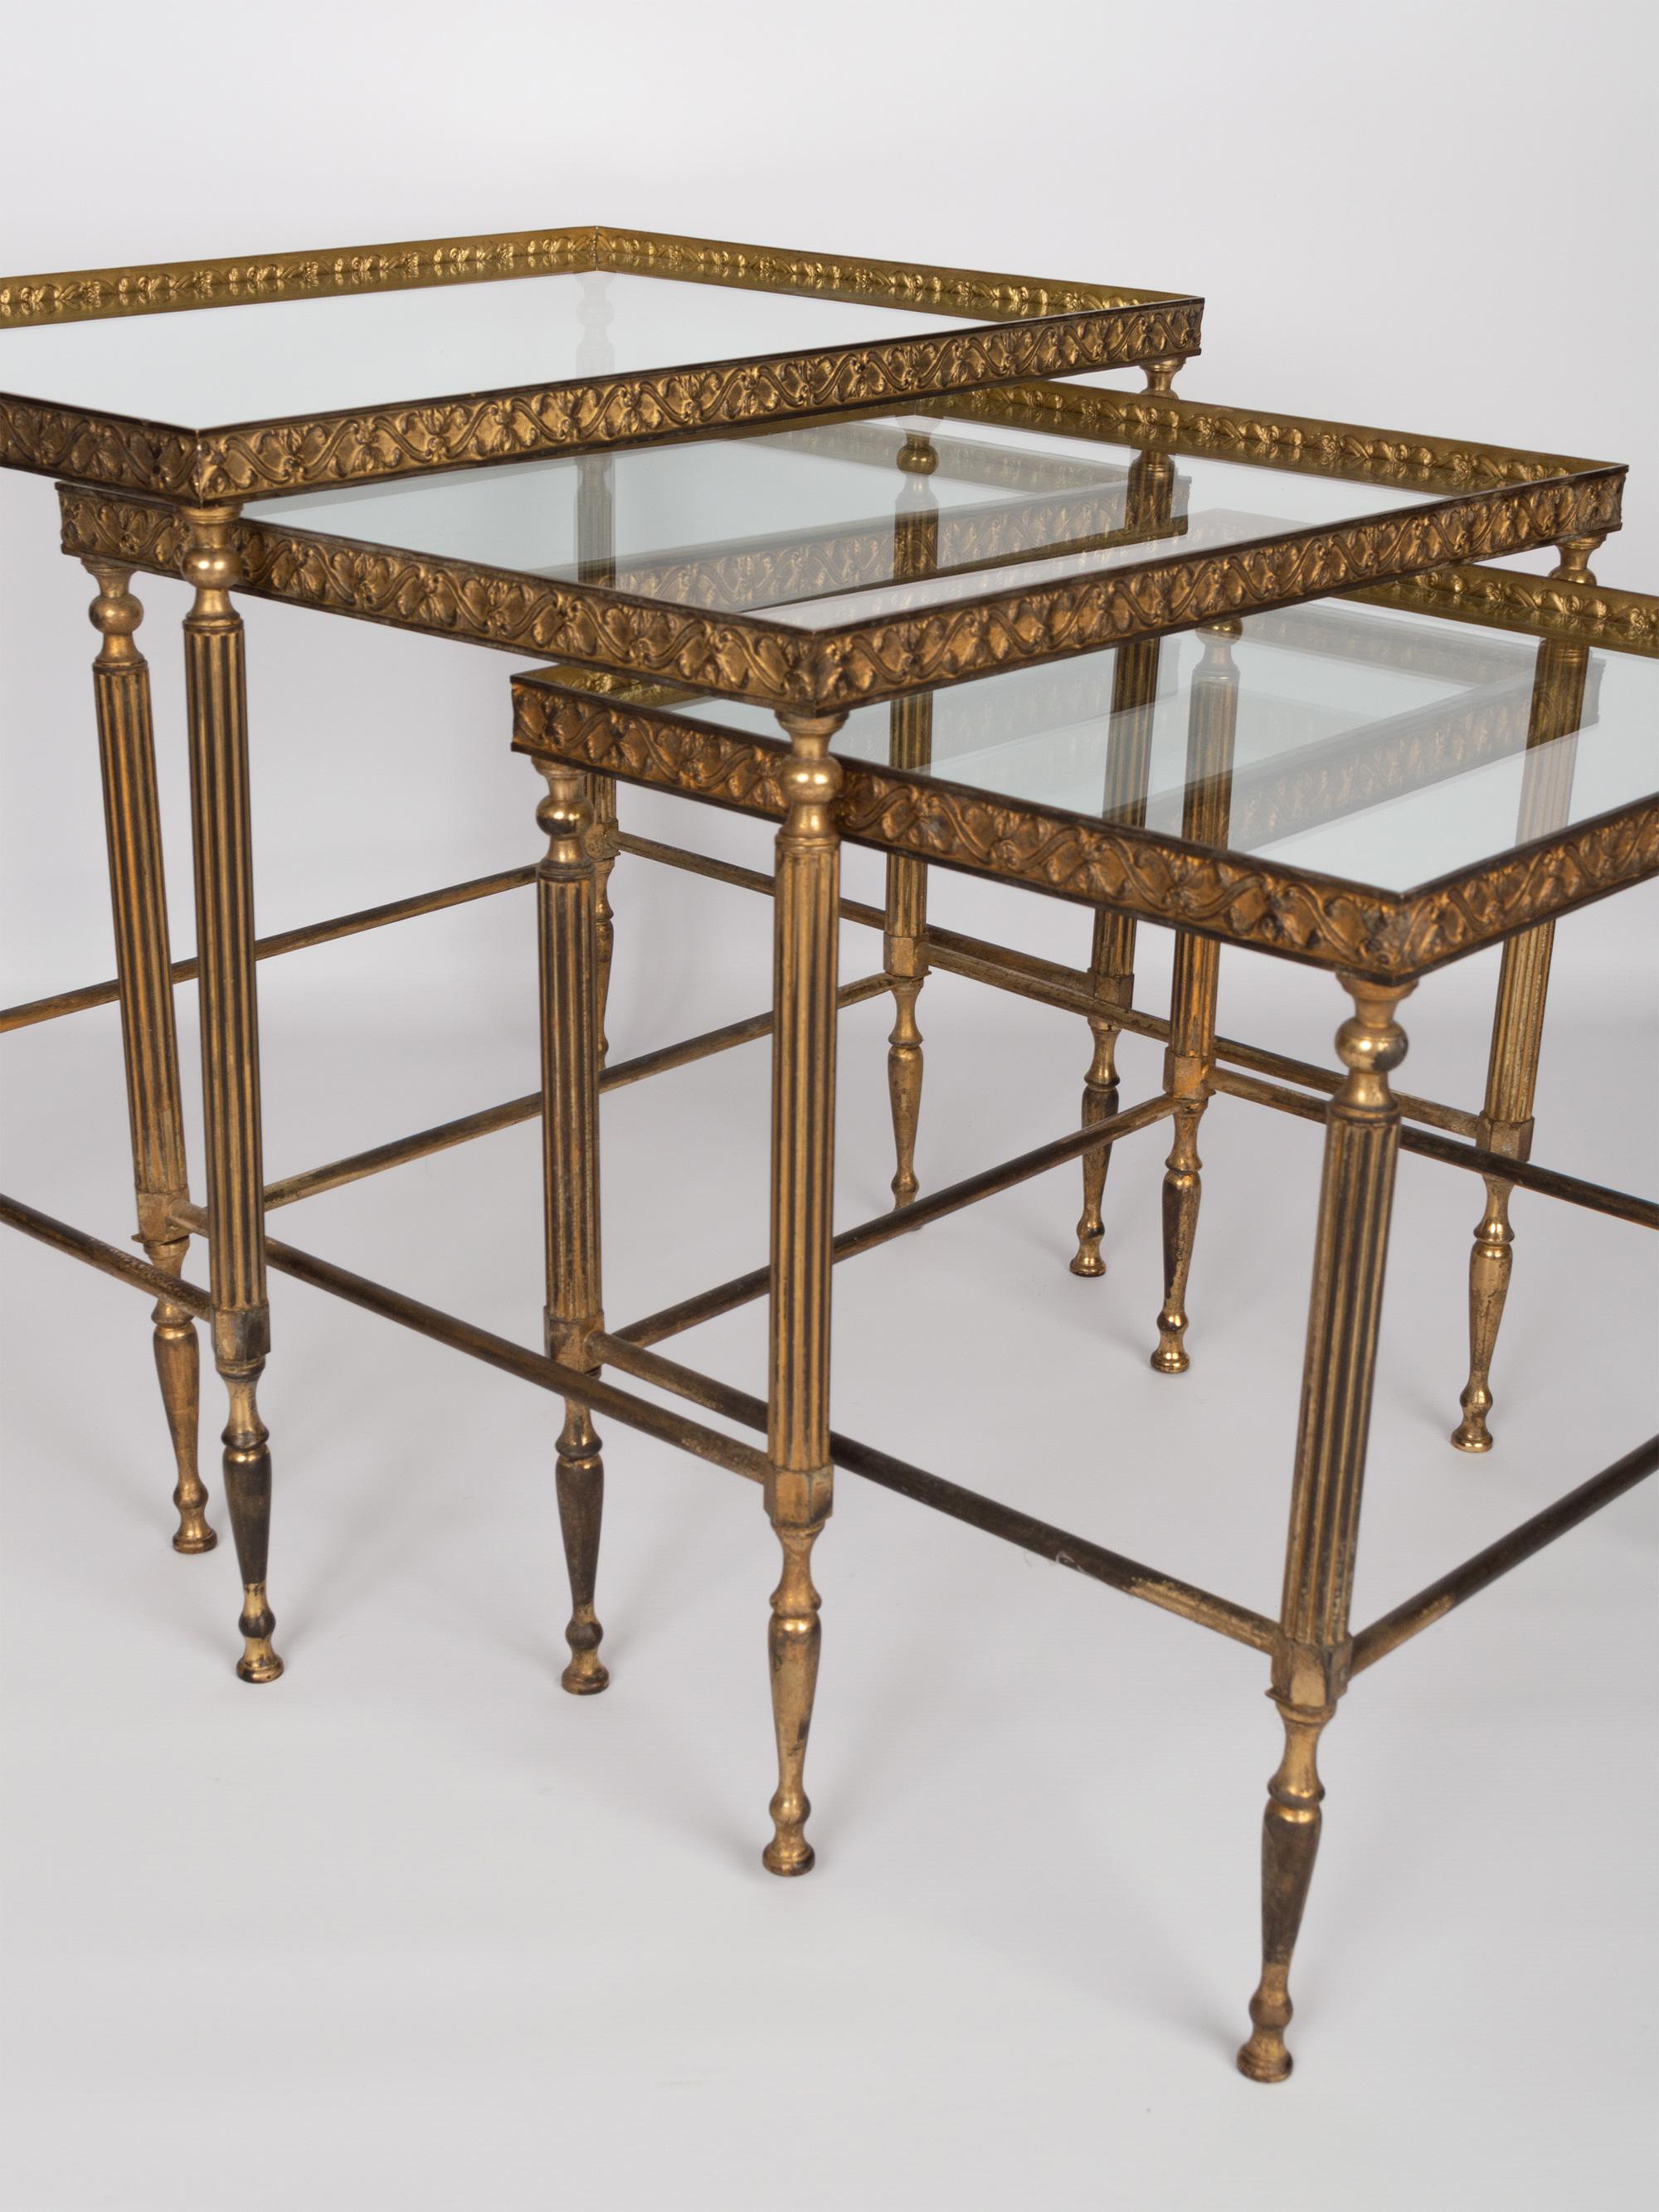 Midcentury bronze brass and glass nesting tables by Maison Baguès. France, circa 1940.
In very good vintage condition commensurate of age. Minor splinter to corner of glass (not directly visible when sitting in frame).
Dimensions:
W 54 x D 37 x H